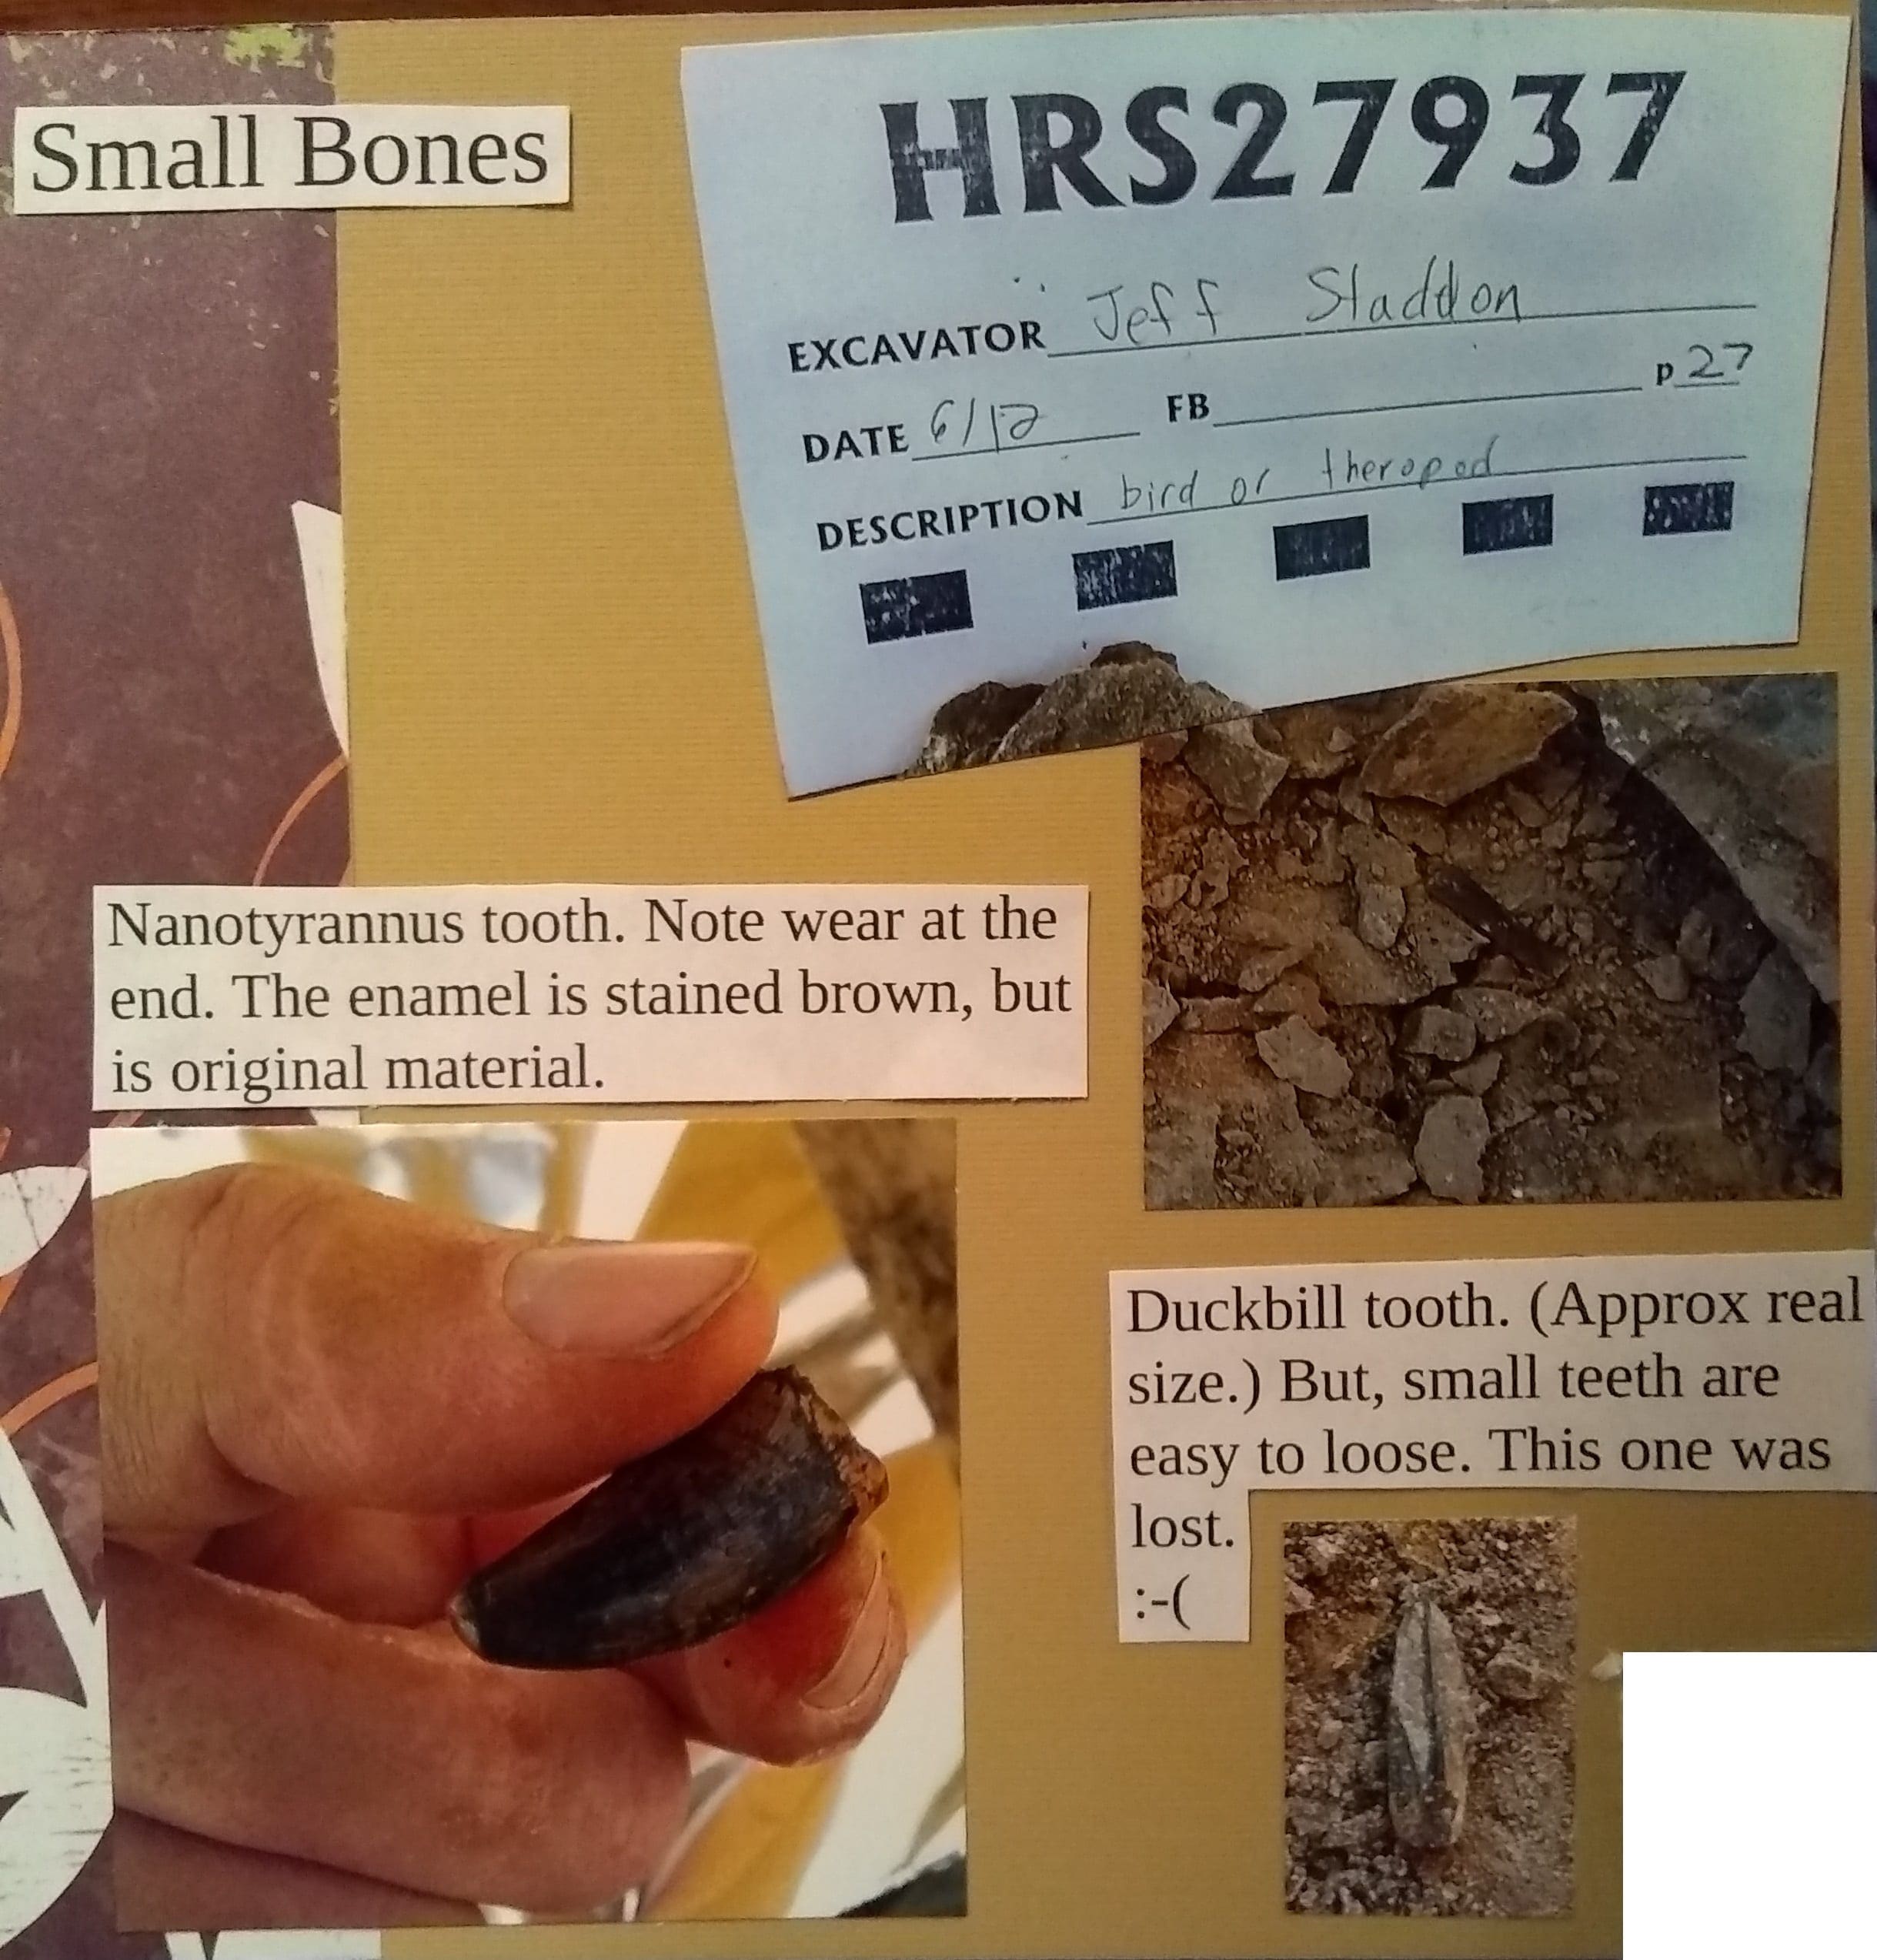 Top: Small bones. Left: Nanotyrannus tooth. Note wear at the end. The enamel is stained brown, but is original material. Bottom: Duckbill tooth (Approximately real size). Small teeth are easy to lose; this one was lots. :-(